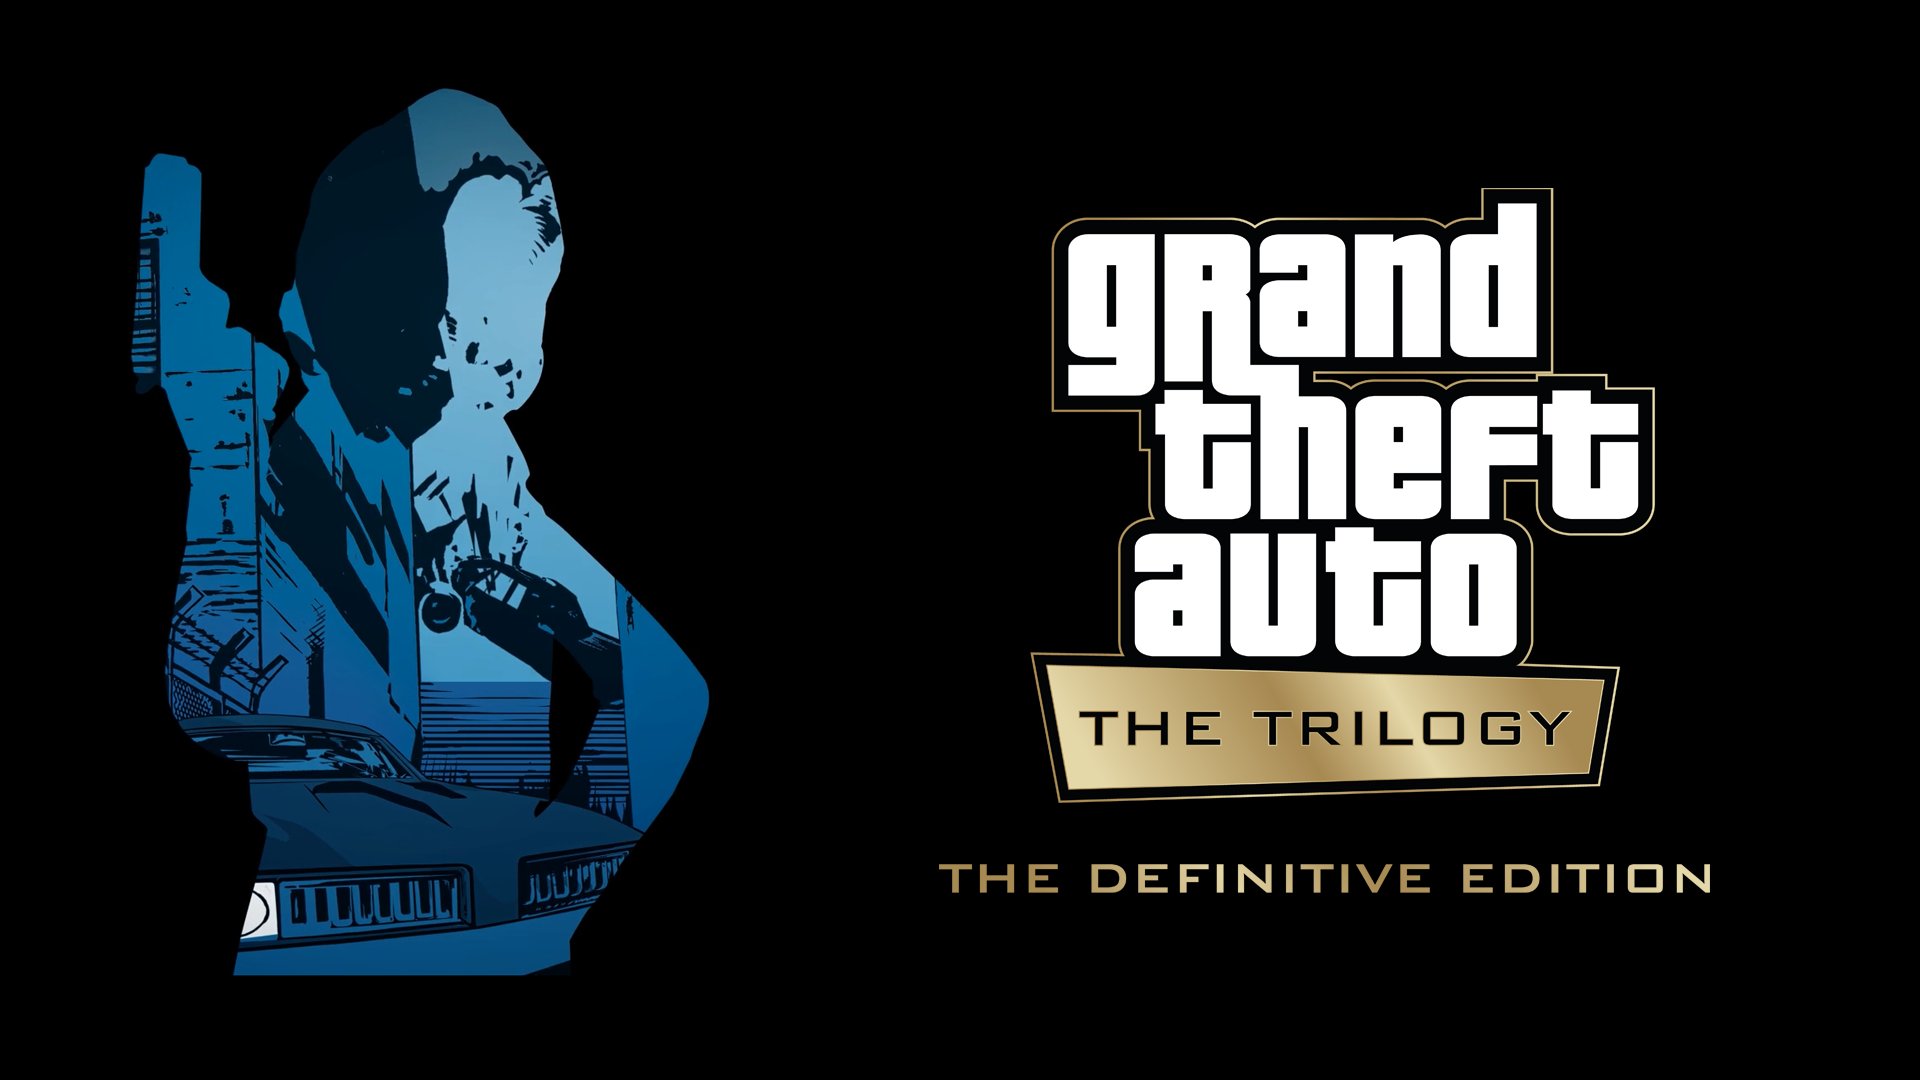 grand theft auto iii, grand theft auto: the trilogy the definitive edition, video game, grand theft auto